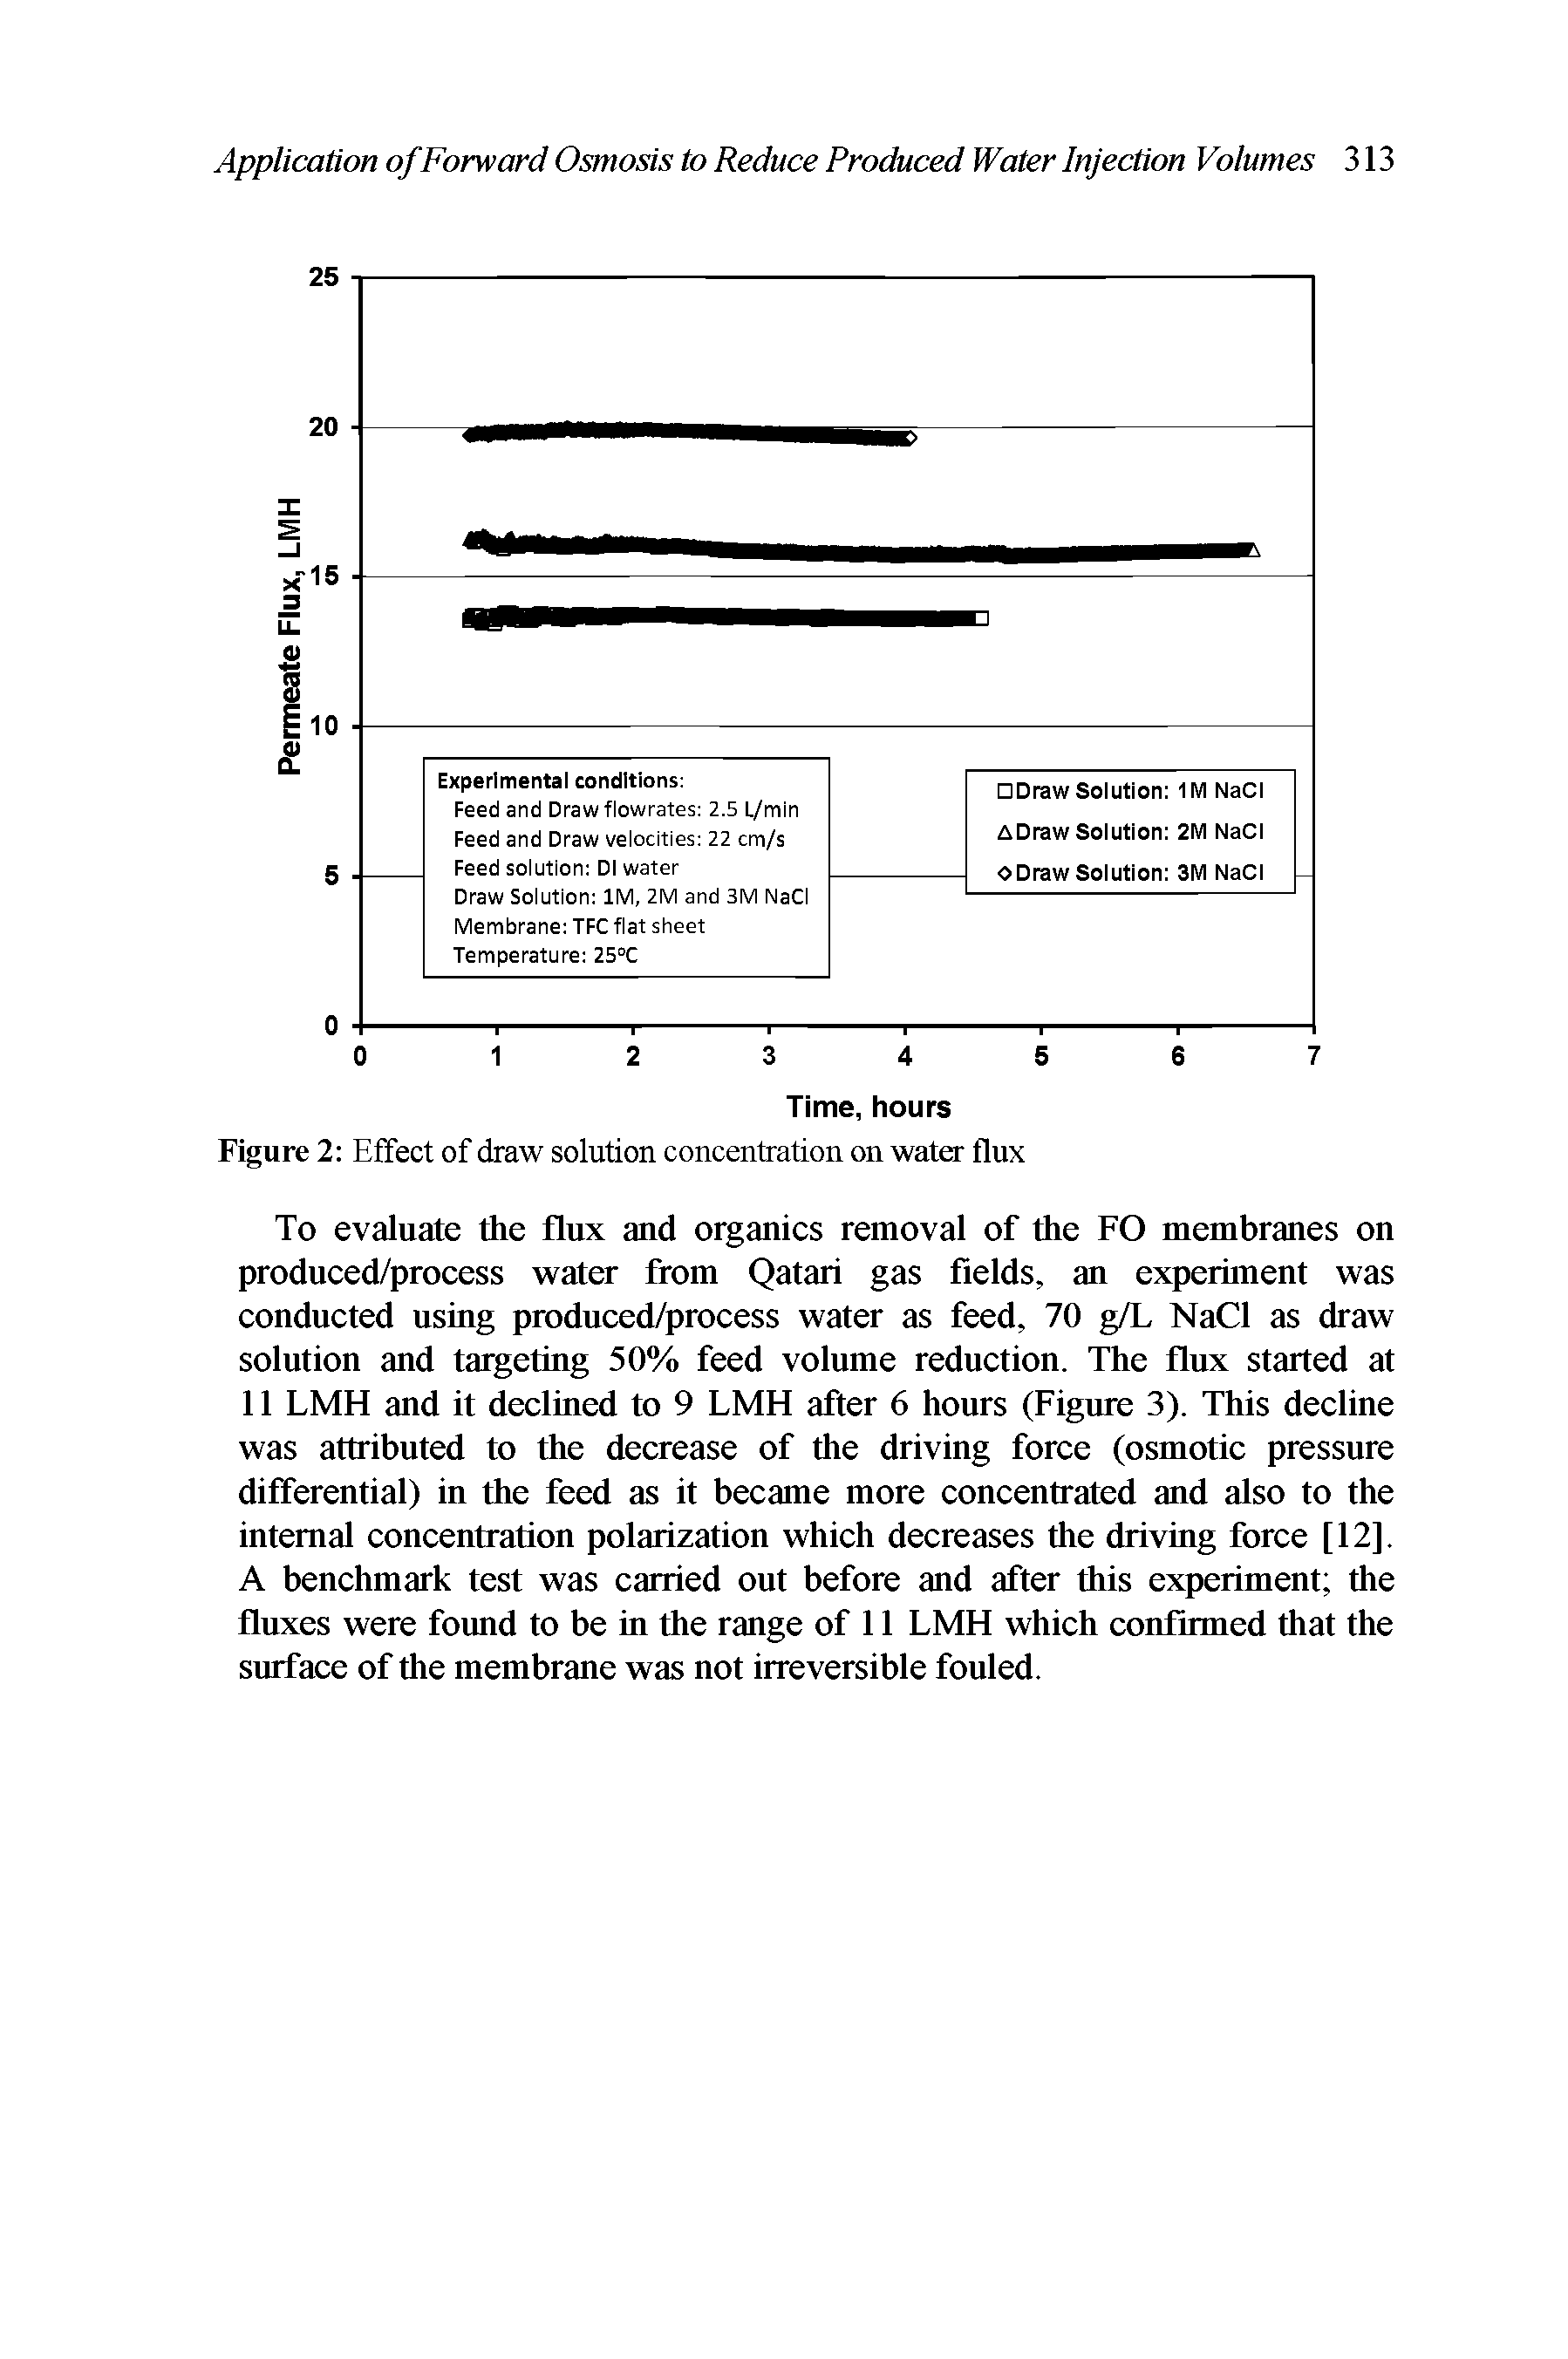 Figure 2 Effect of draw solution concentration on water flux...